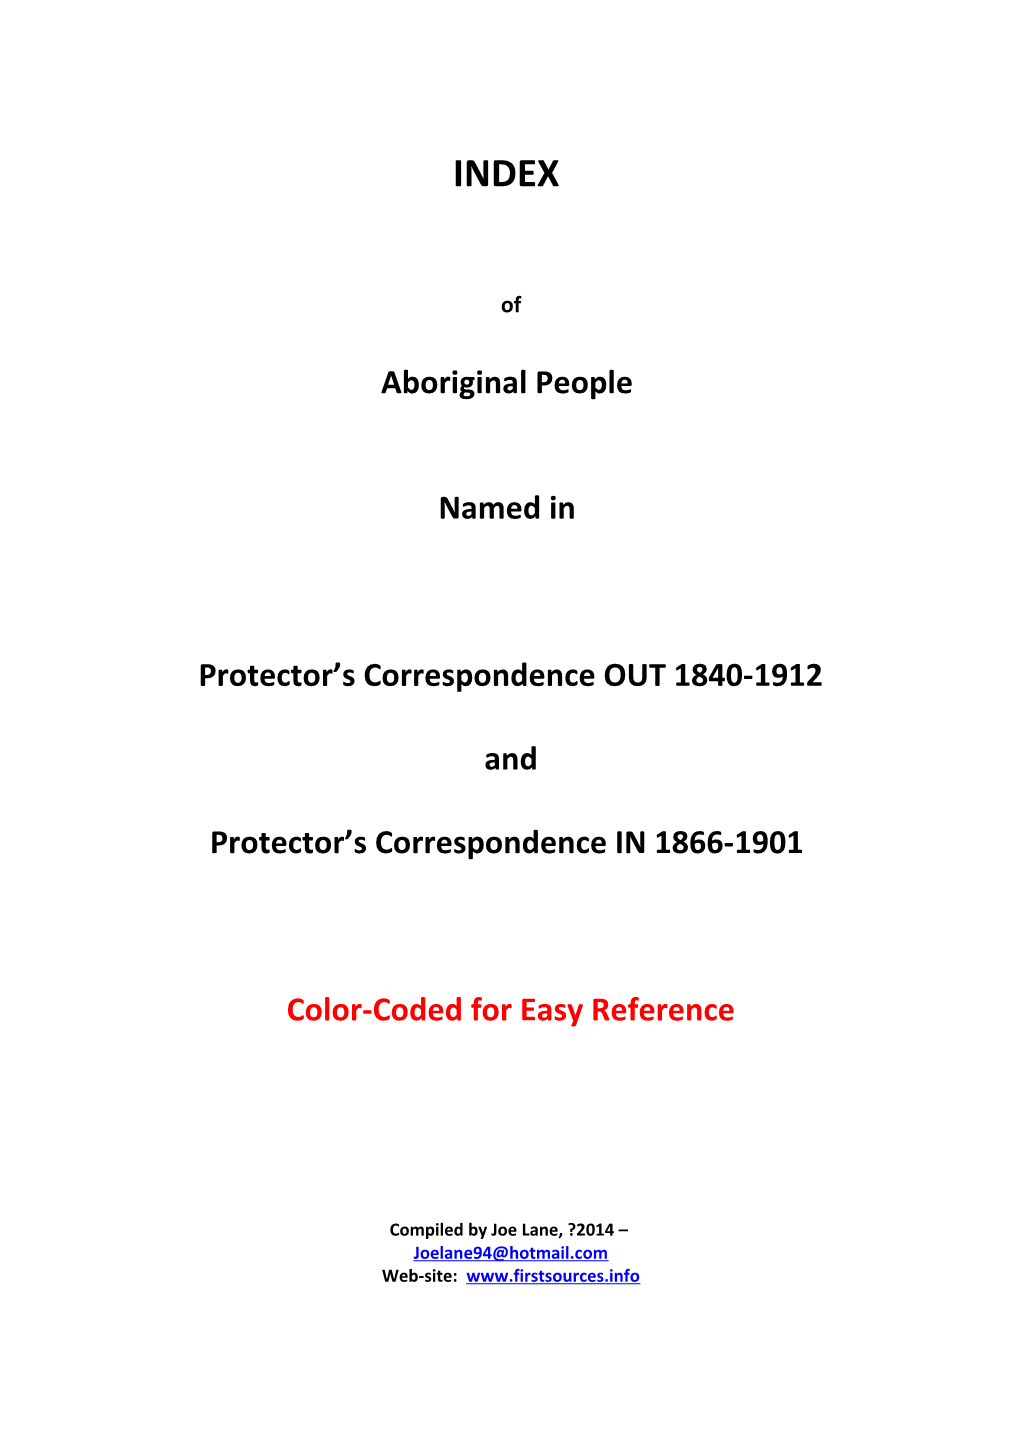 Protector S Correspondence out 1840-1912